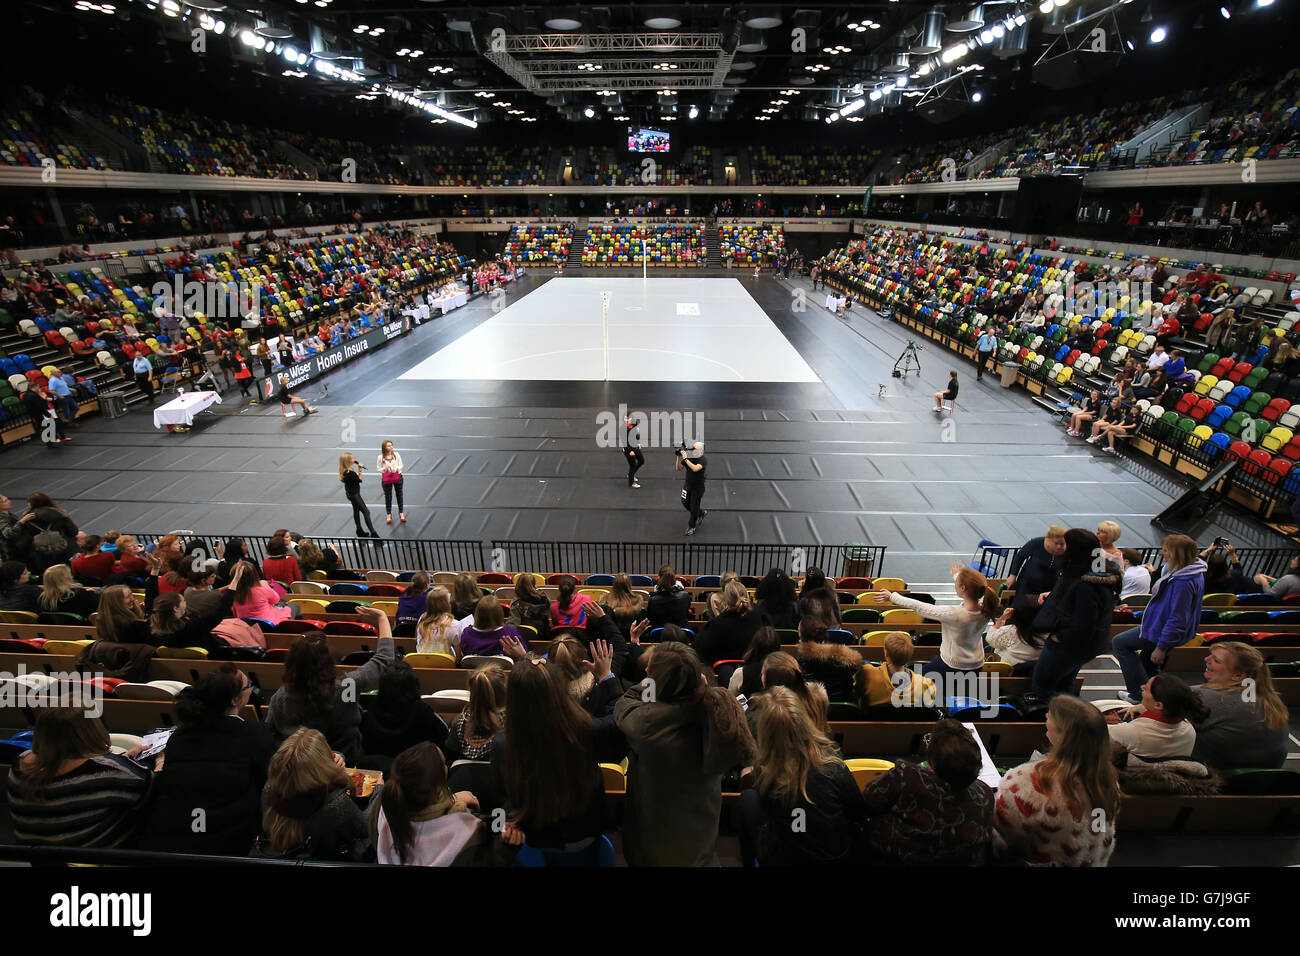 Netball - International Netball Series - England v Malawi - Copper Box Arena. A general view of the Copper Box Arena Stock Photo